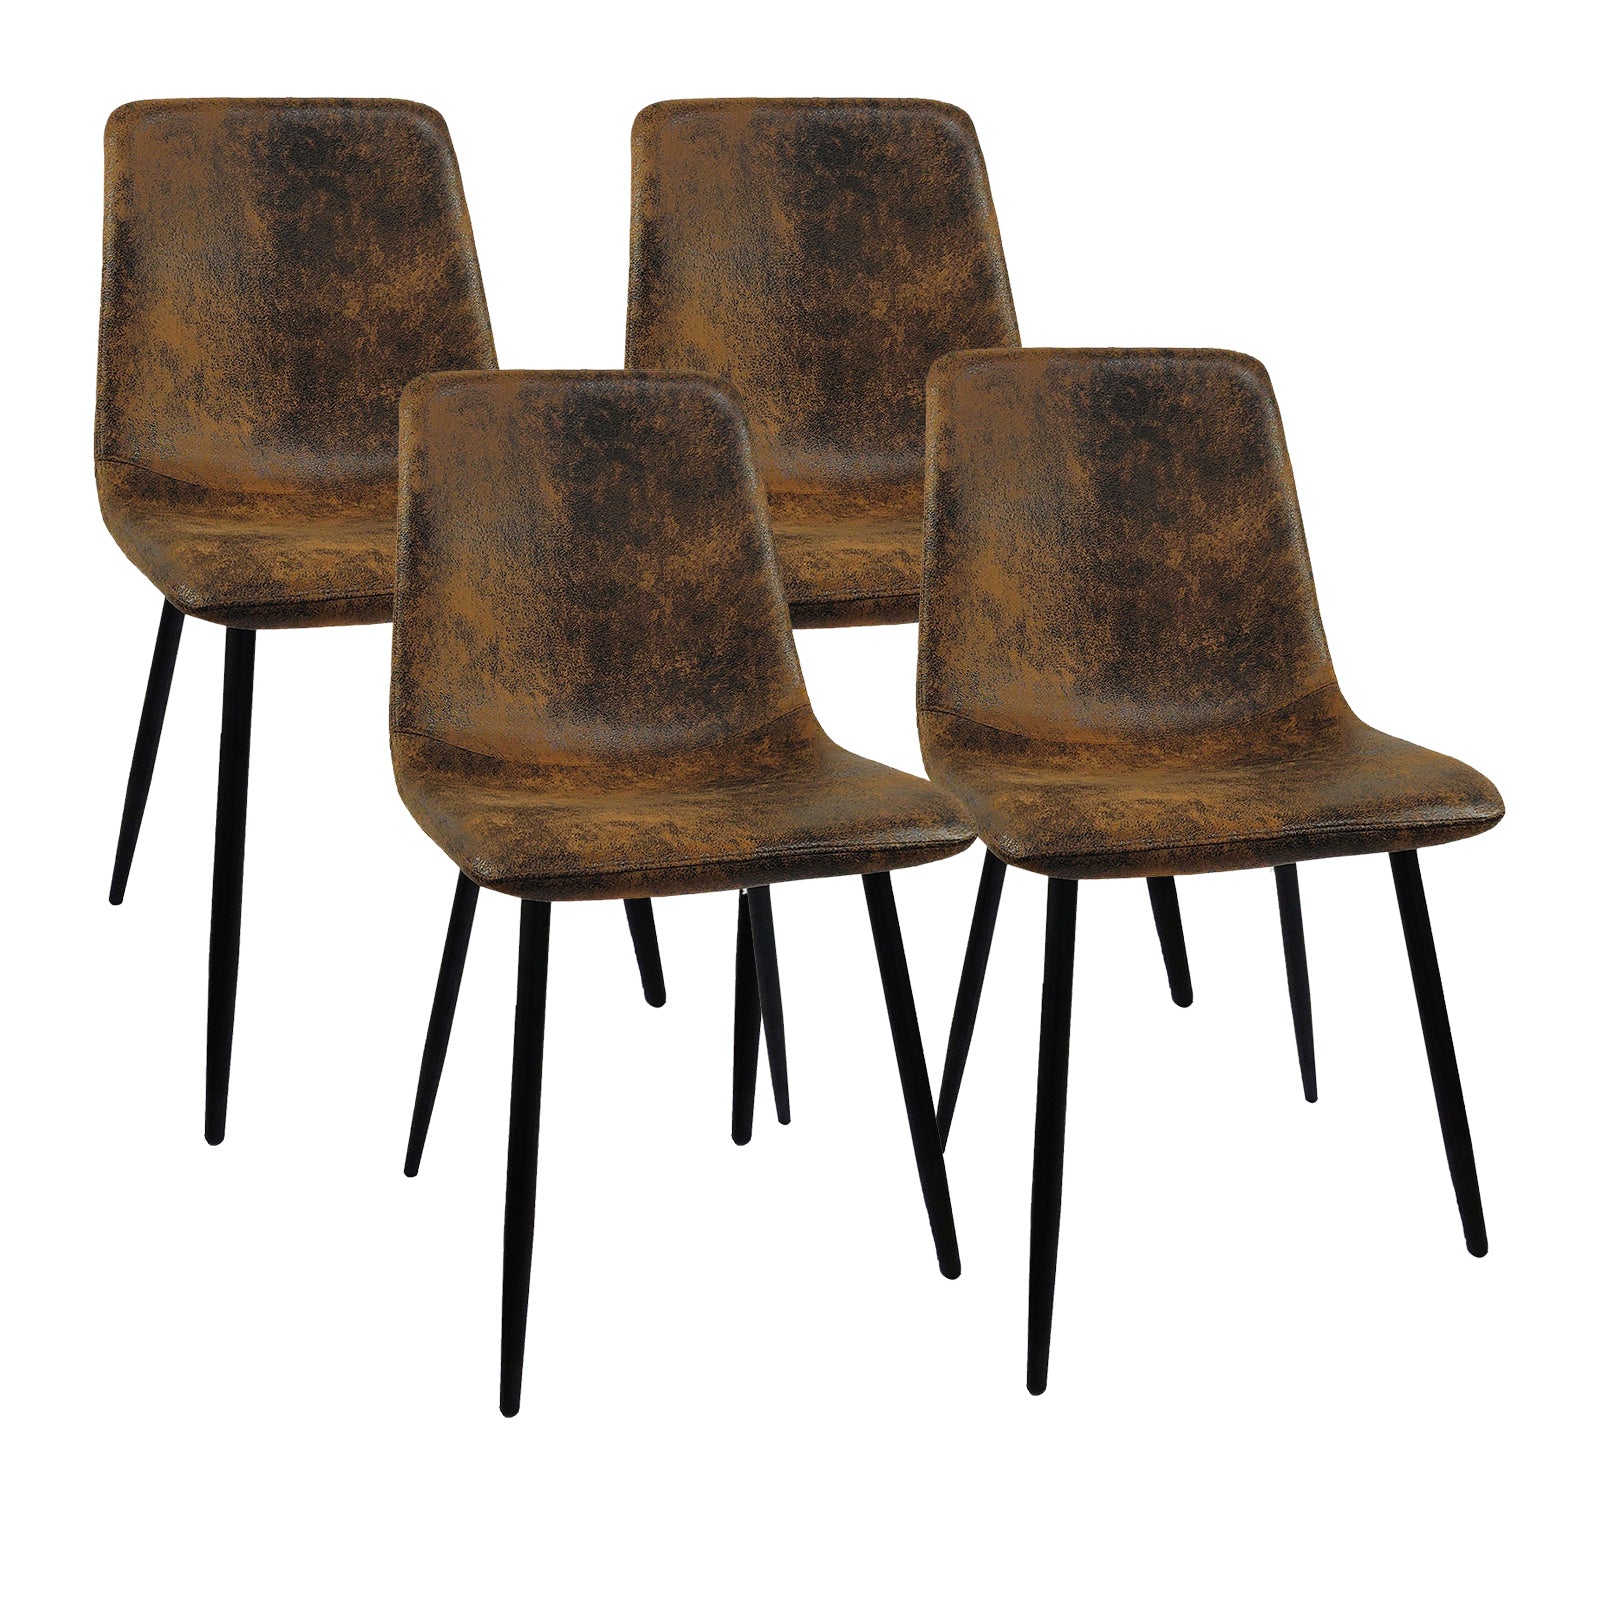 Set of 4 Modern Kitchen Dining Room Chairs, Cushion Seat and Sturdy Black Metal Legs - Brown